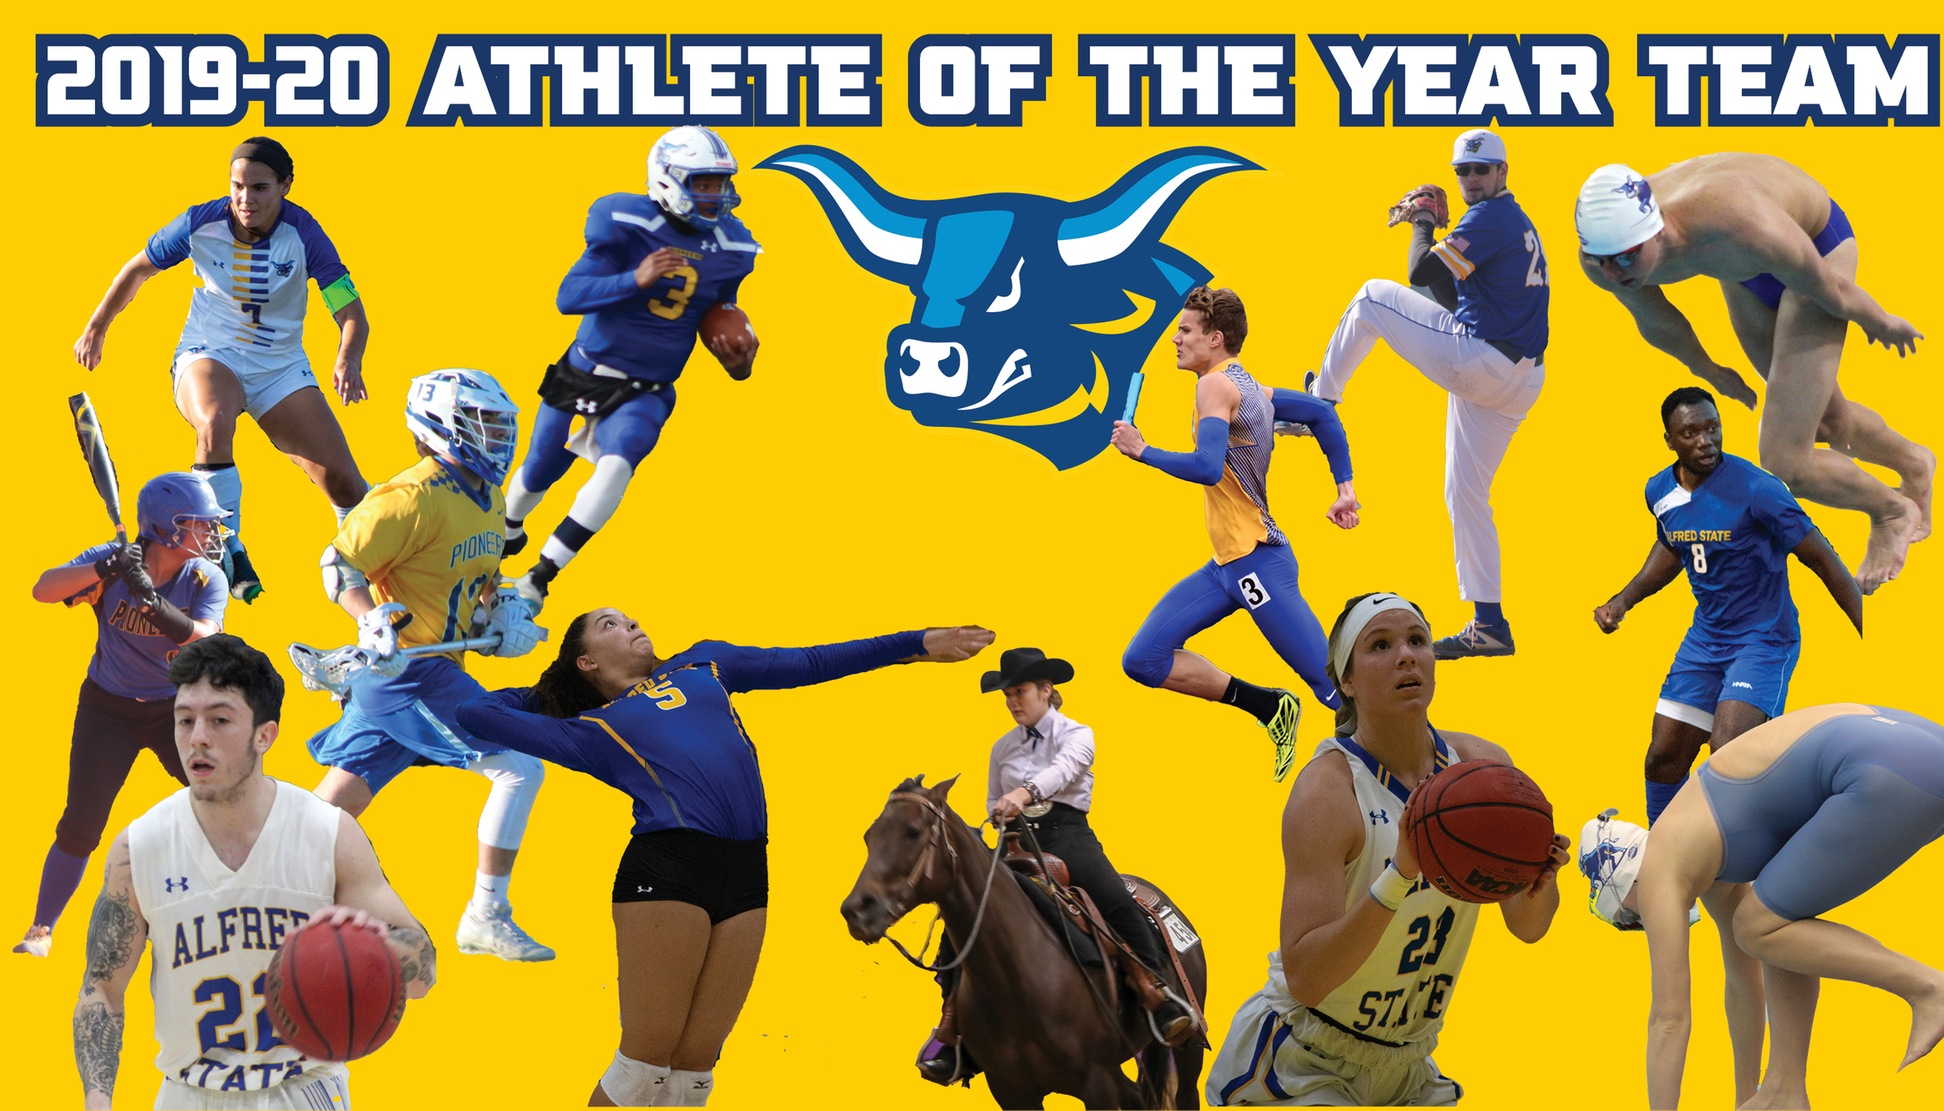 The 2019-20 Alfred State Athlete of the Year Team